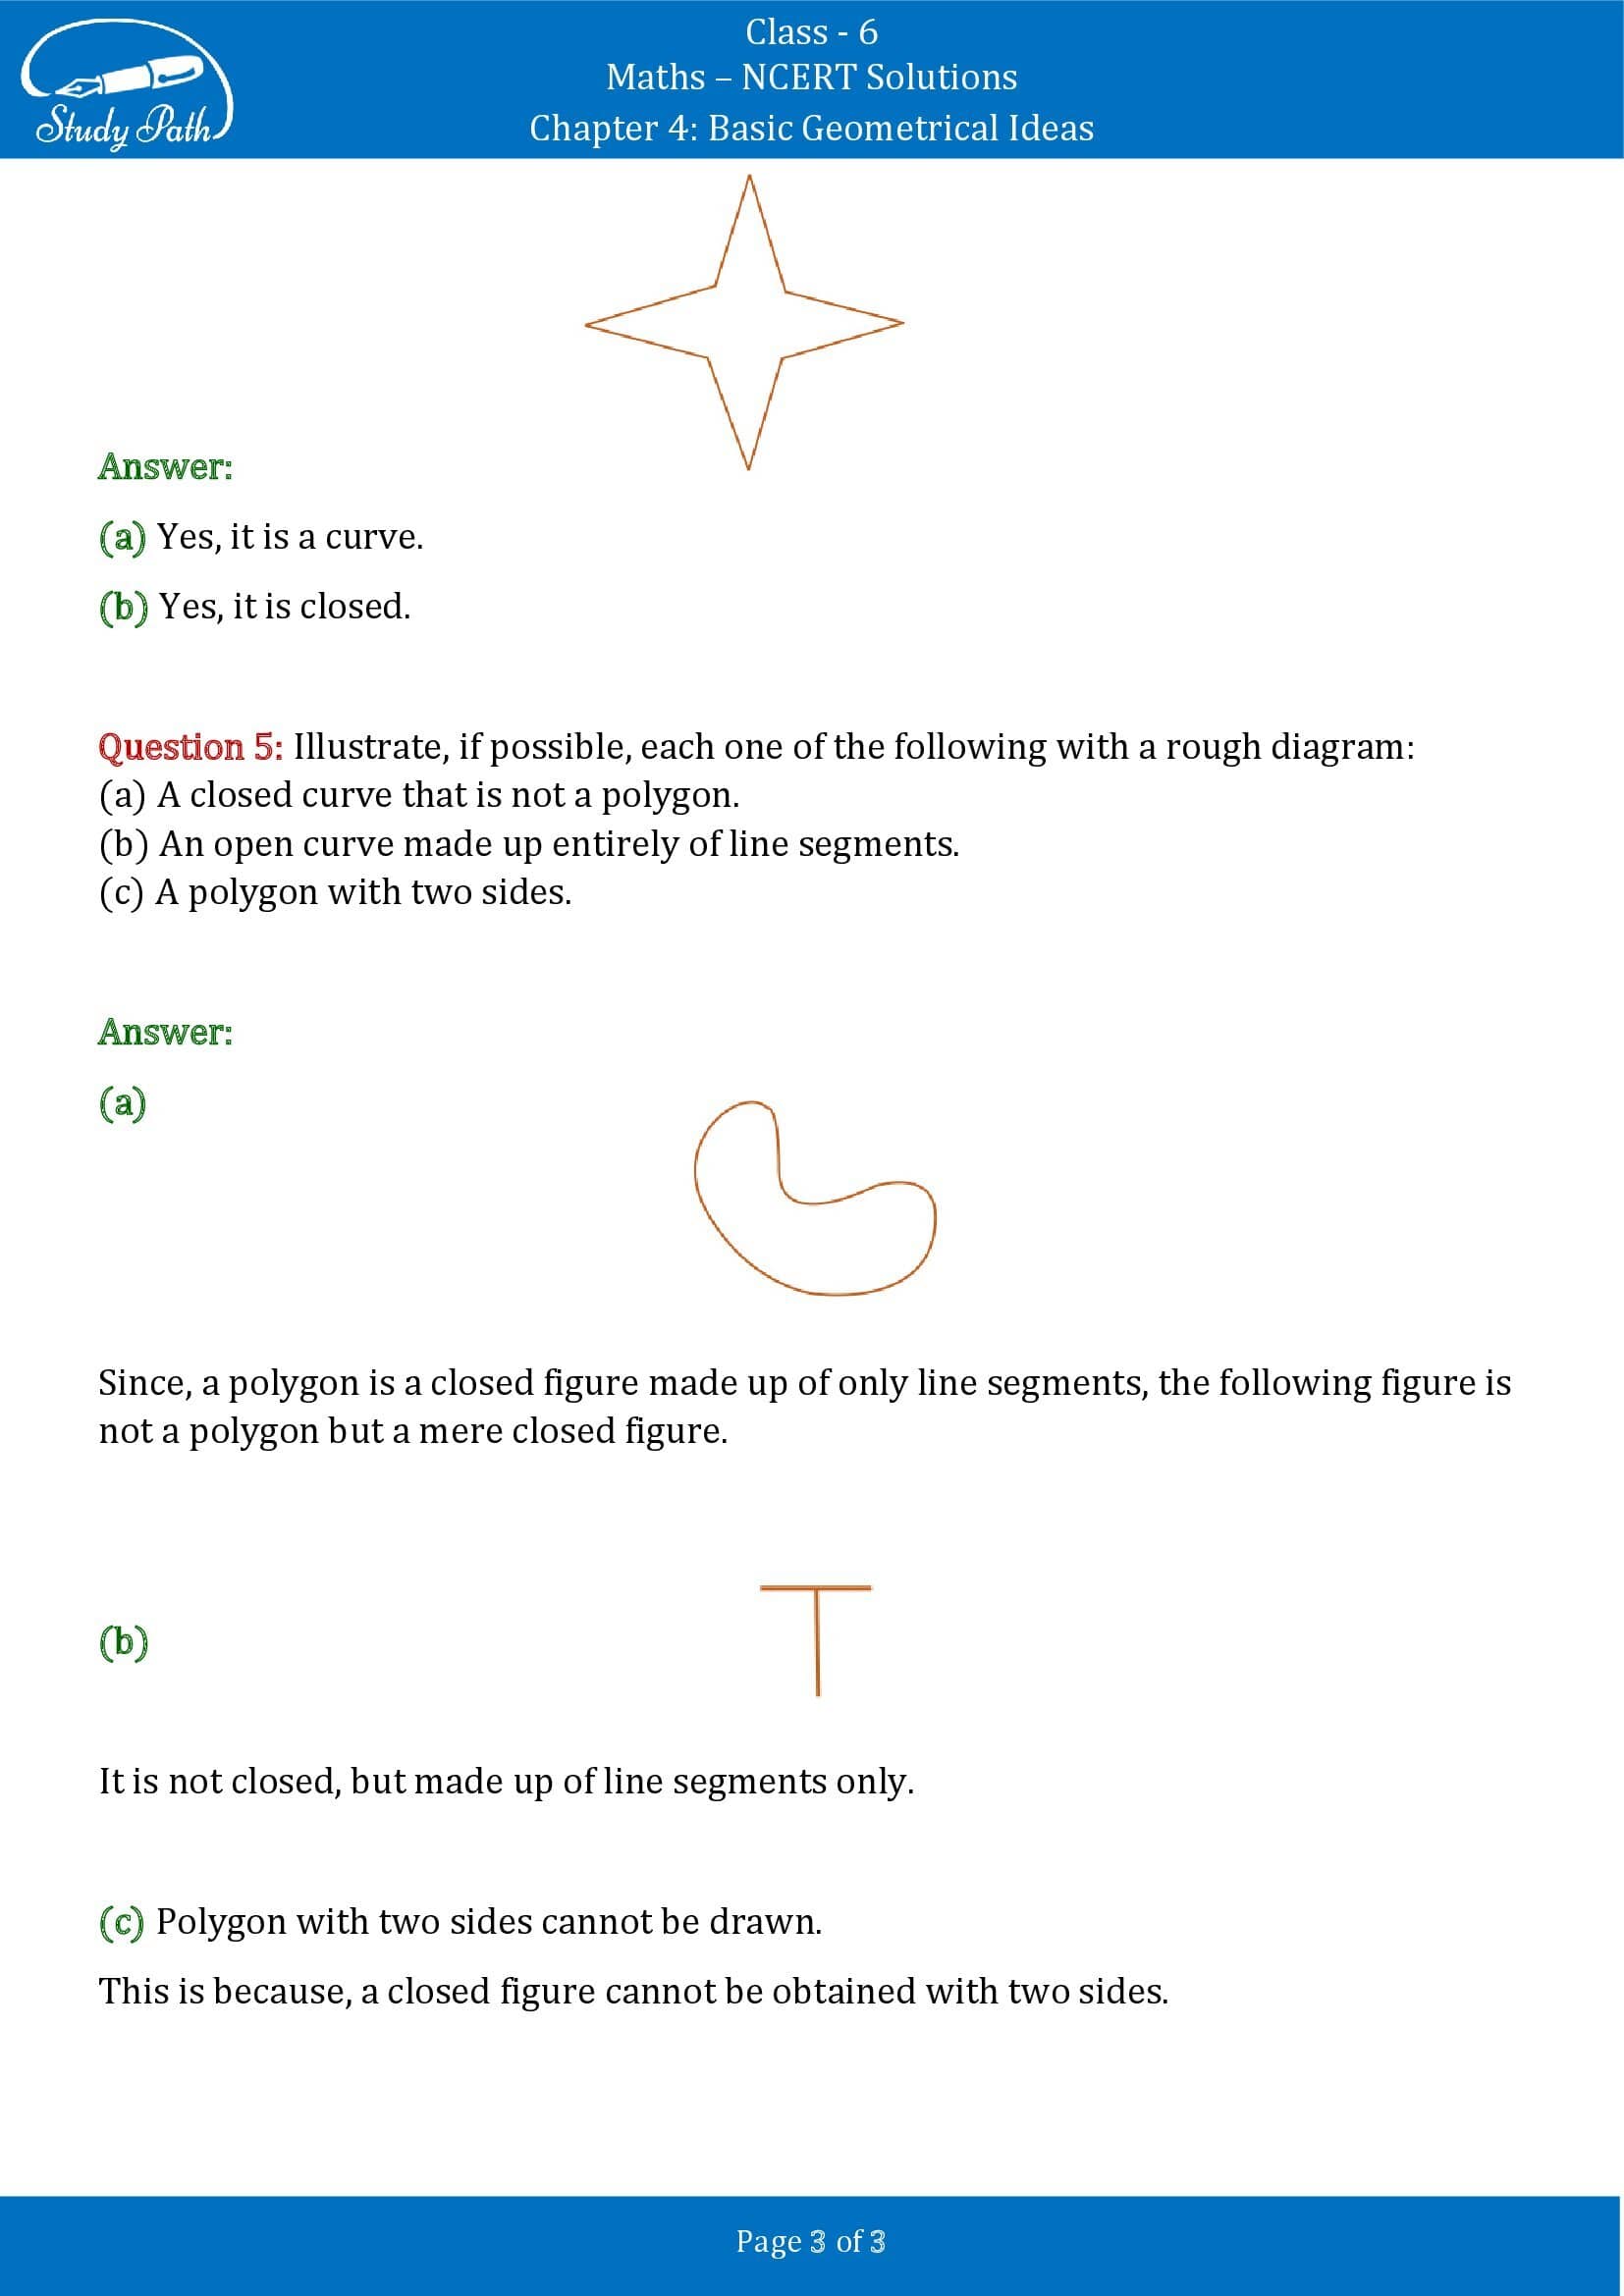 NCERT Solutions for Class 6 Maths Chapter 4 Basic Geometrical Ideas Exercise 4.2 00003